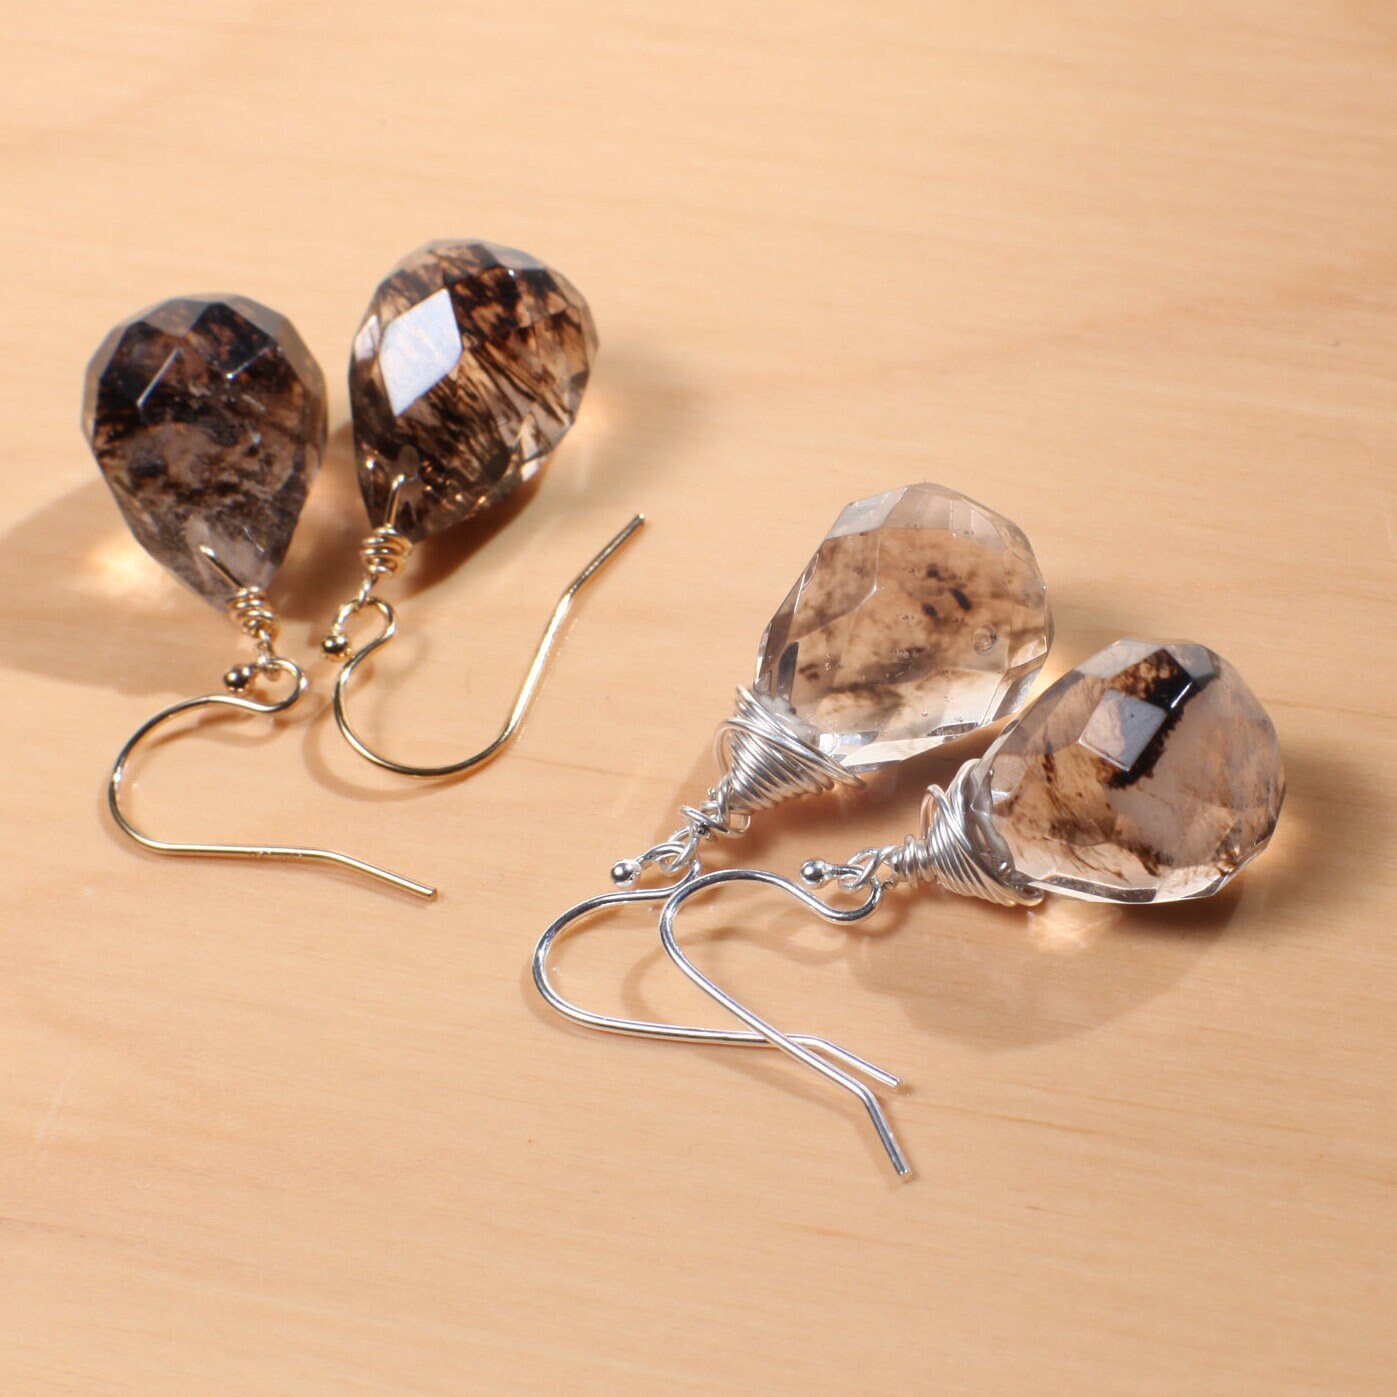 Black Rutilated Quartz Wire Wrapped 12x16mm drop in 925 Sterling Silver and 14K Gold Filled earrings in French Hook Earwire or Leverback.